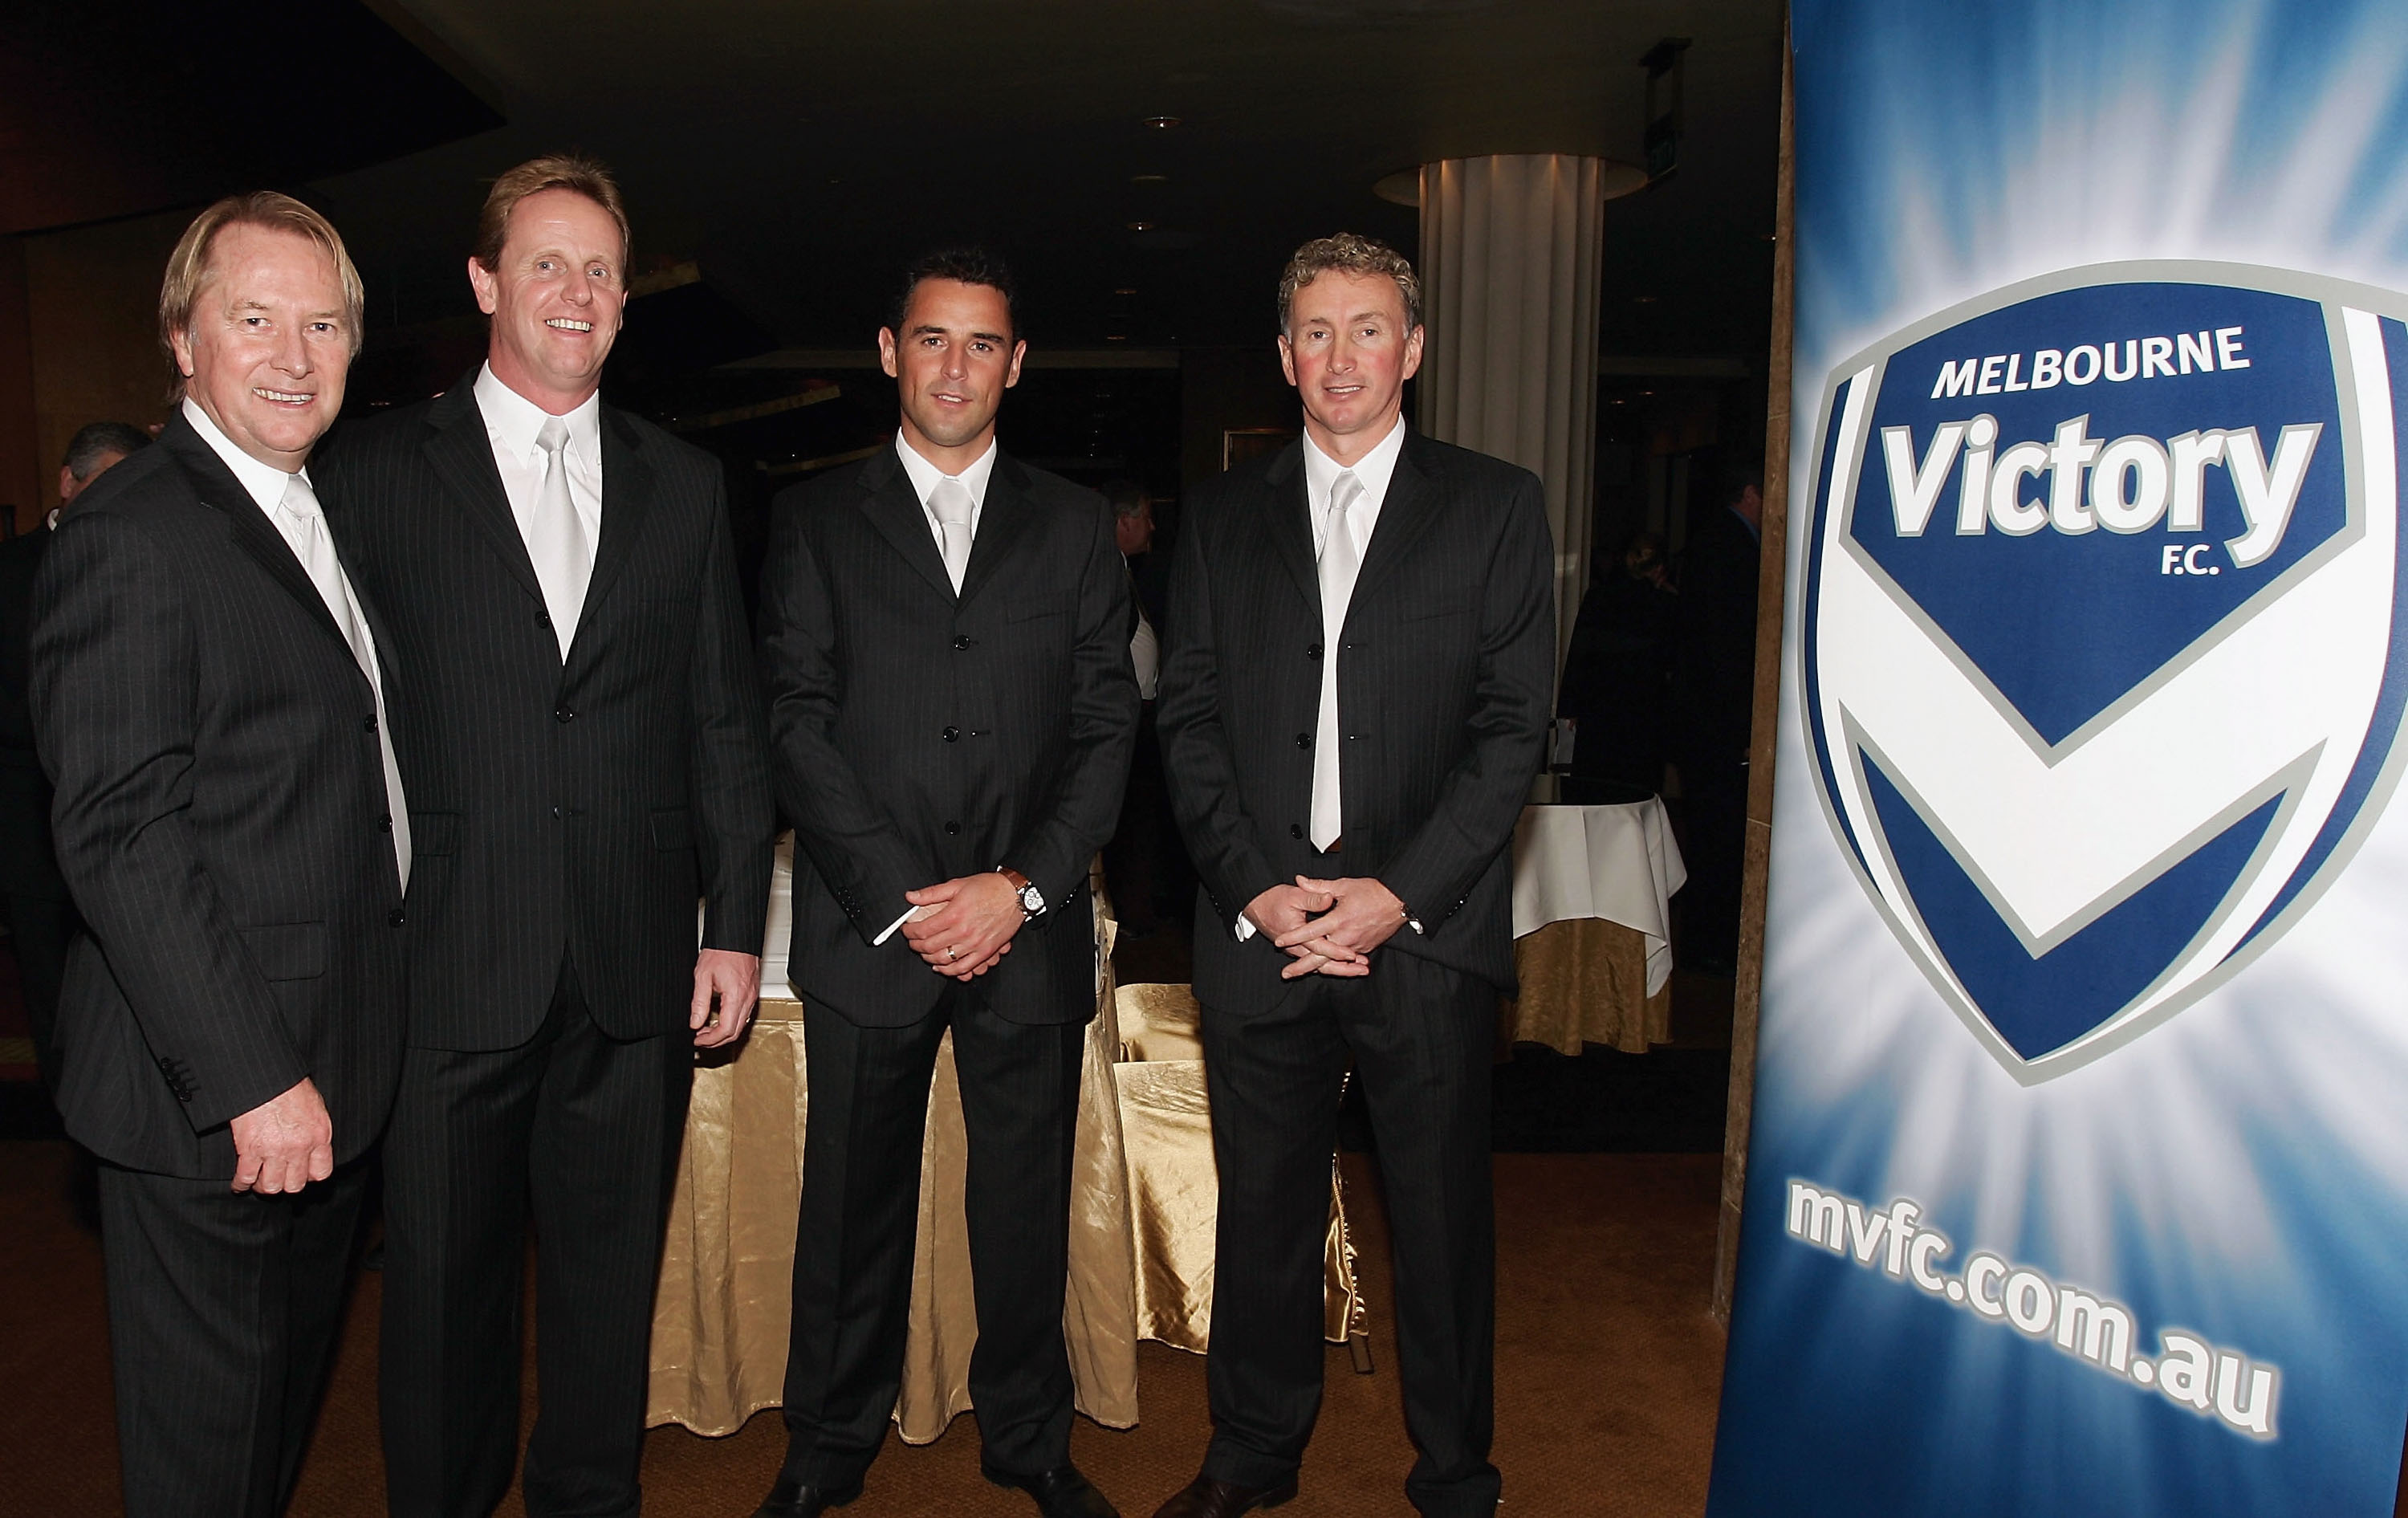 Glen Wheatly, Gary Cole, Kevin Muscat and Ernie Merrick during the Melbourne Victory FC launch in 2005